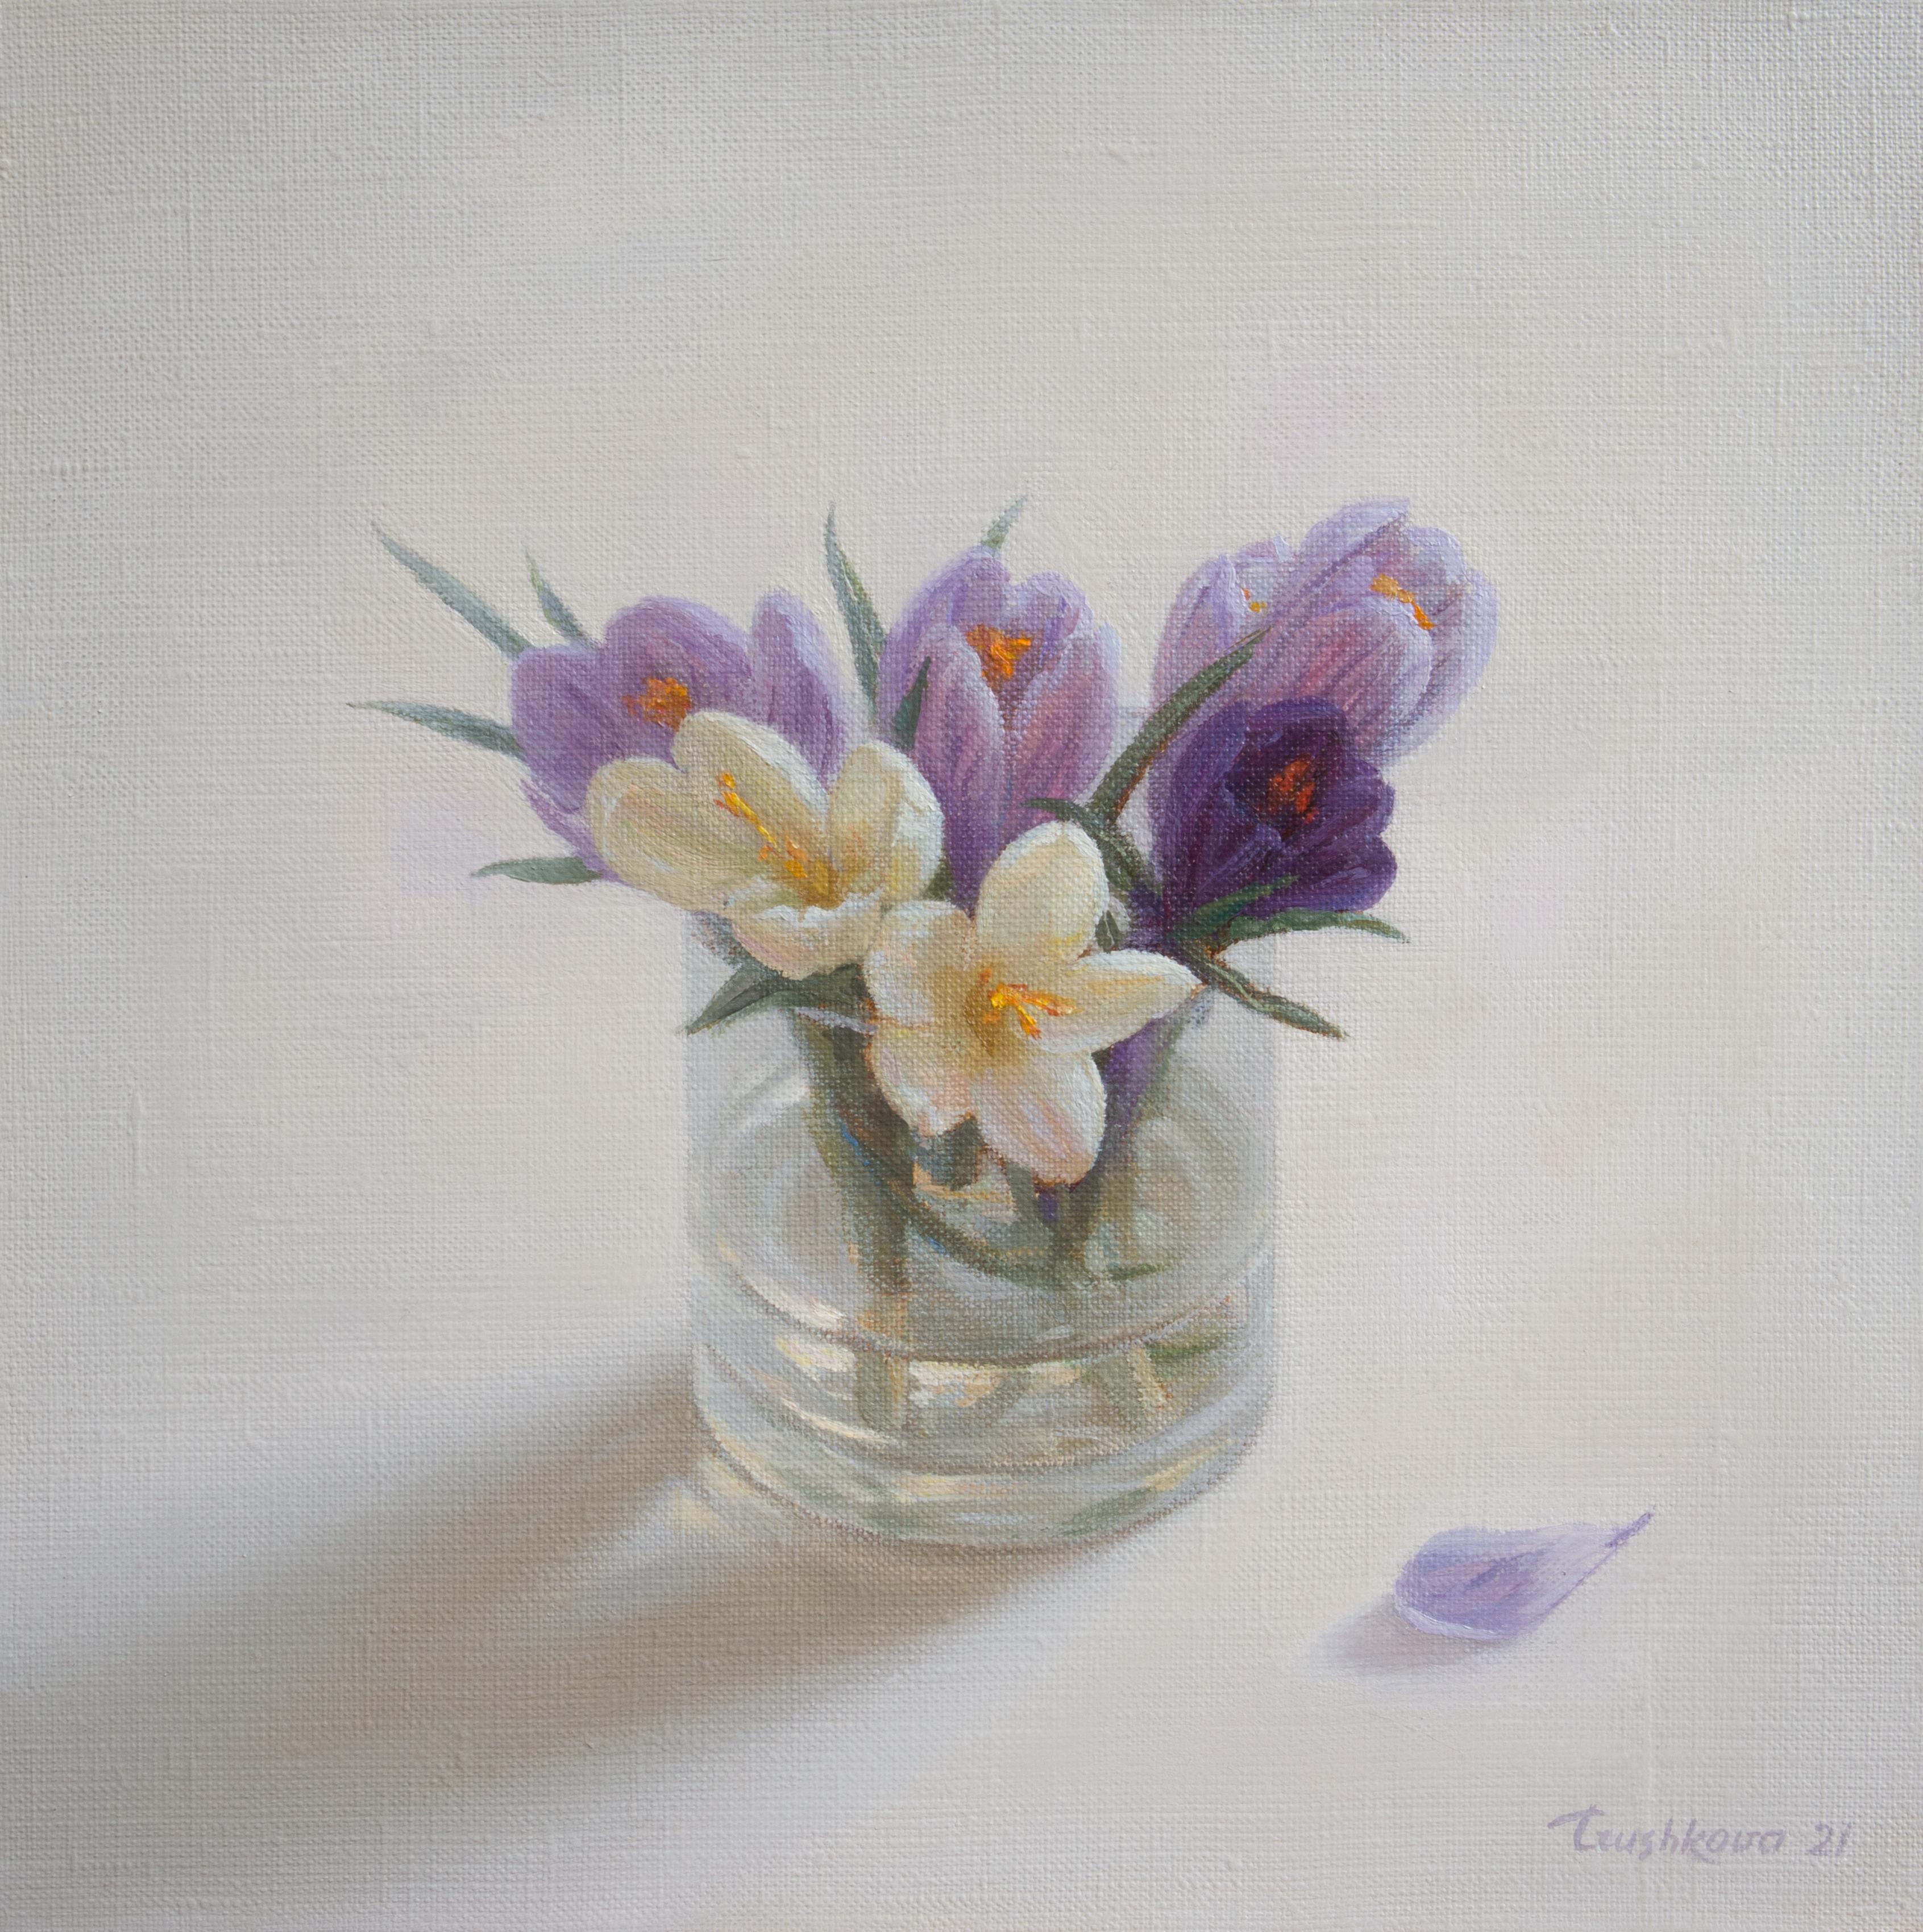 A vibrant blue and white crocuses vase is placed in a smooth, neutral space. I intended to keep the tenderness and preciousness of flowers, a quality I wanted to preserve. The work is painted from life on a 100% linen canvas with high-quality oil.